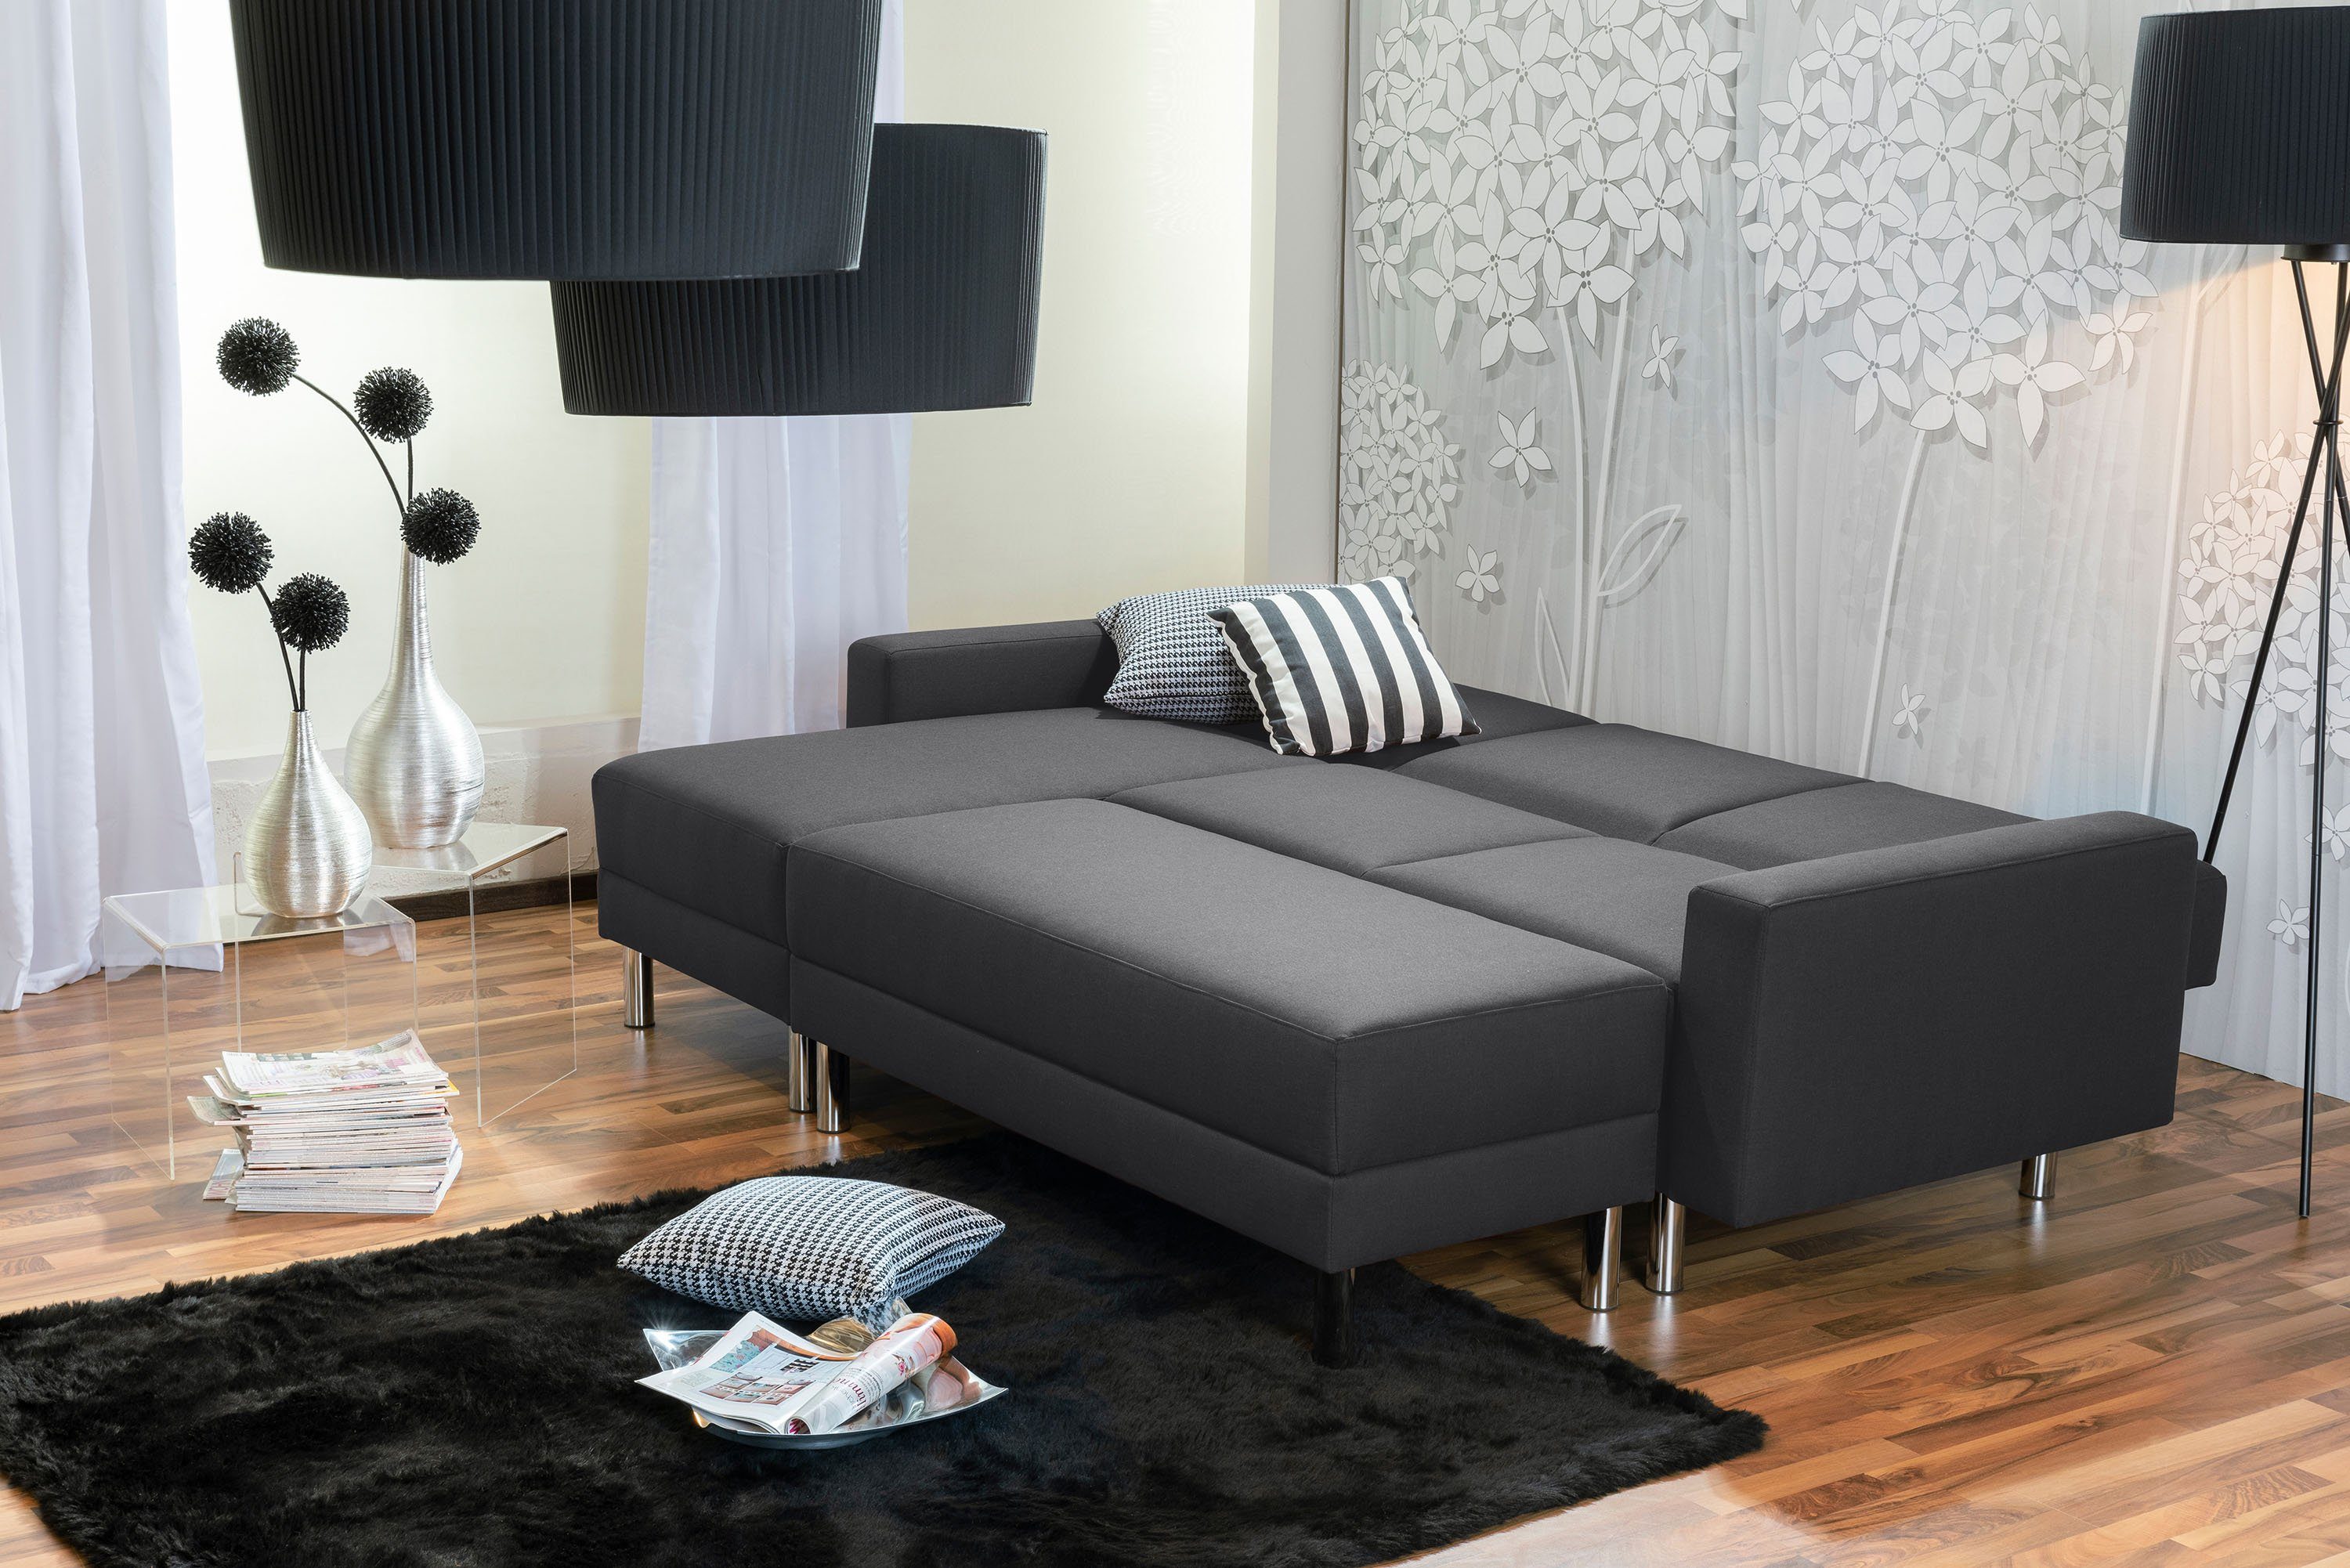 Max Winzer® Loungesofa Germany Just Stück, 1 graphit, Flachgewebe Made Fashion Funktionssofa in